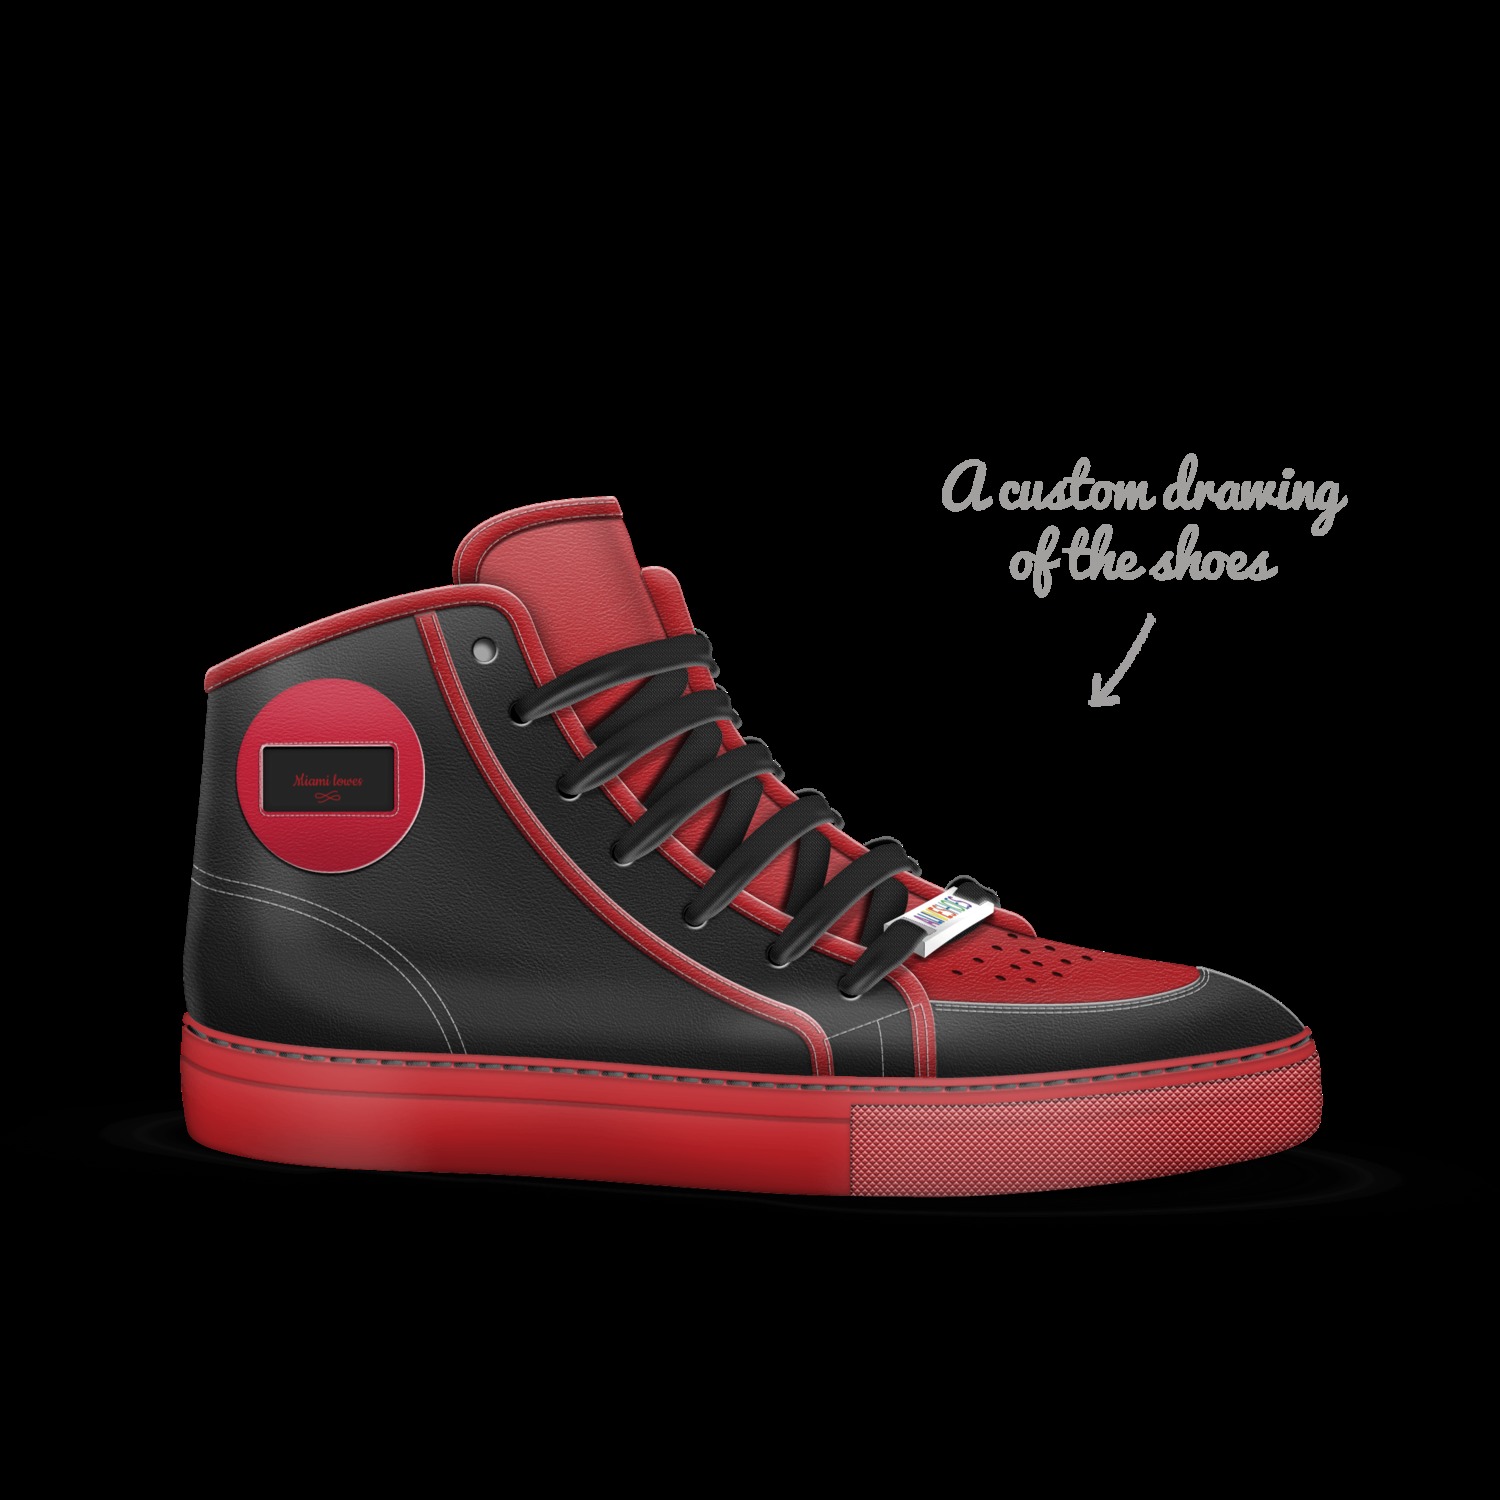 Miami lowes | A Custom Shoe concept by 